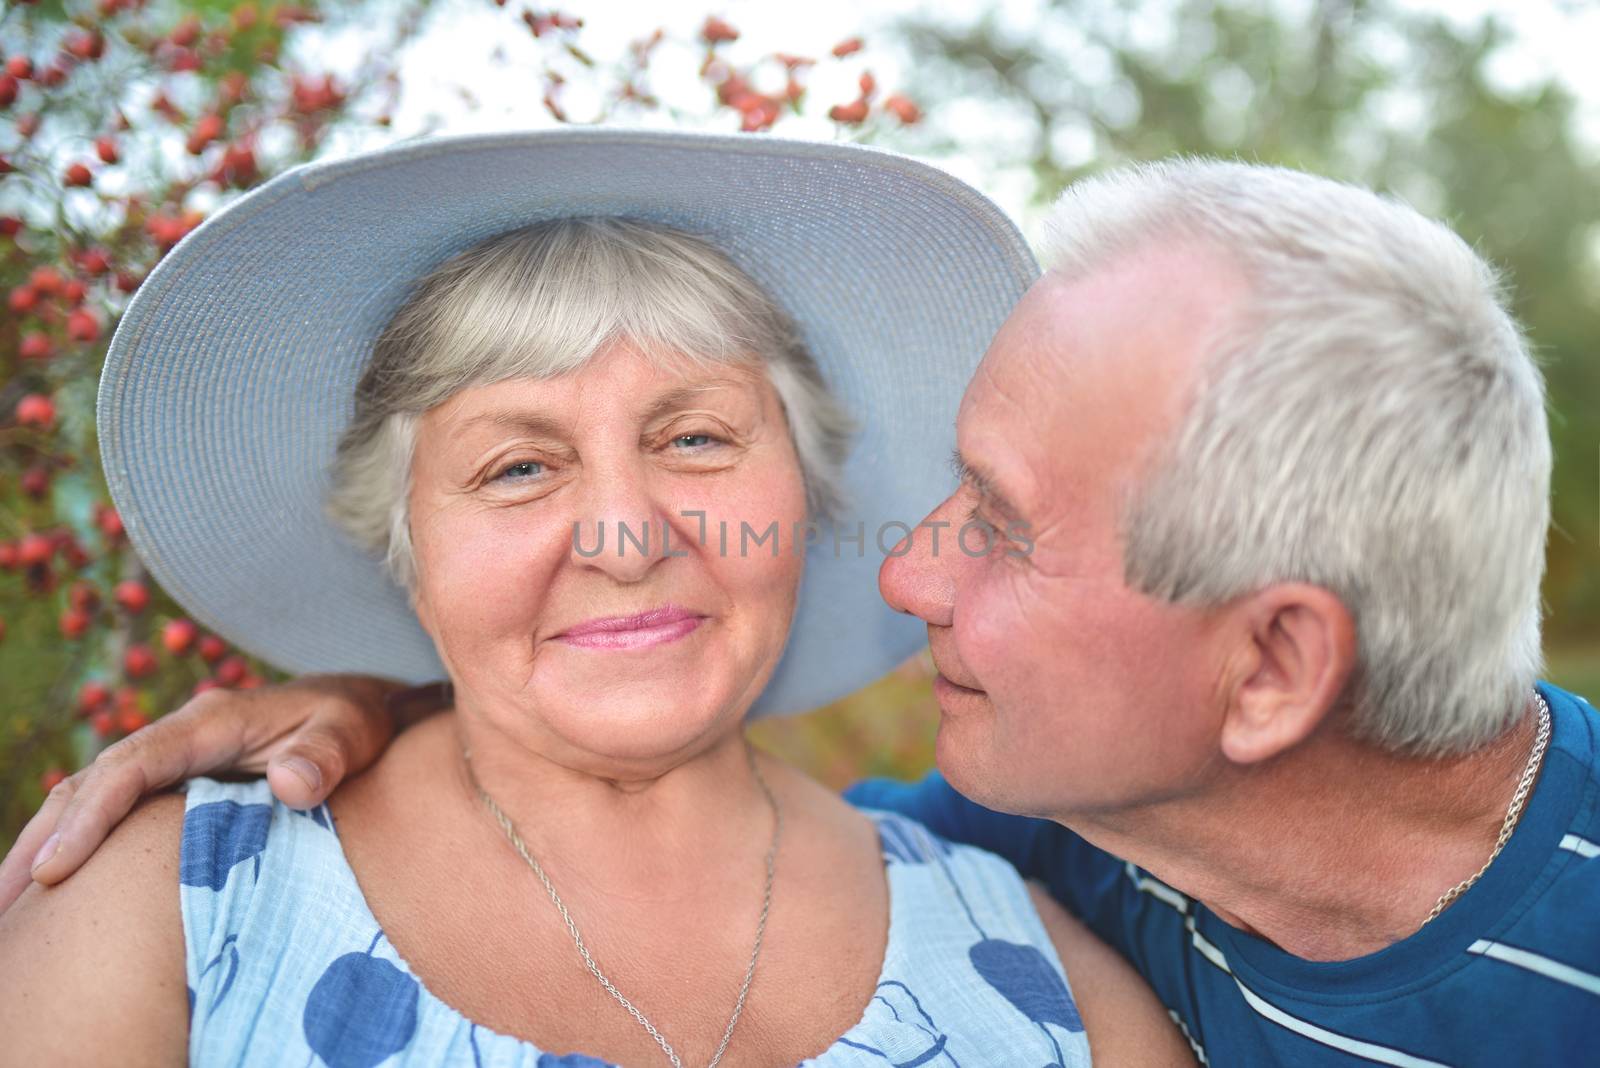 Authentic outdoor shot of aging couple having fun in the garden and blessed with love. During their game man is trying to kiss his wife and she is smiling. Love and family concept.